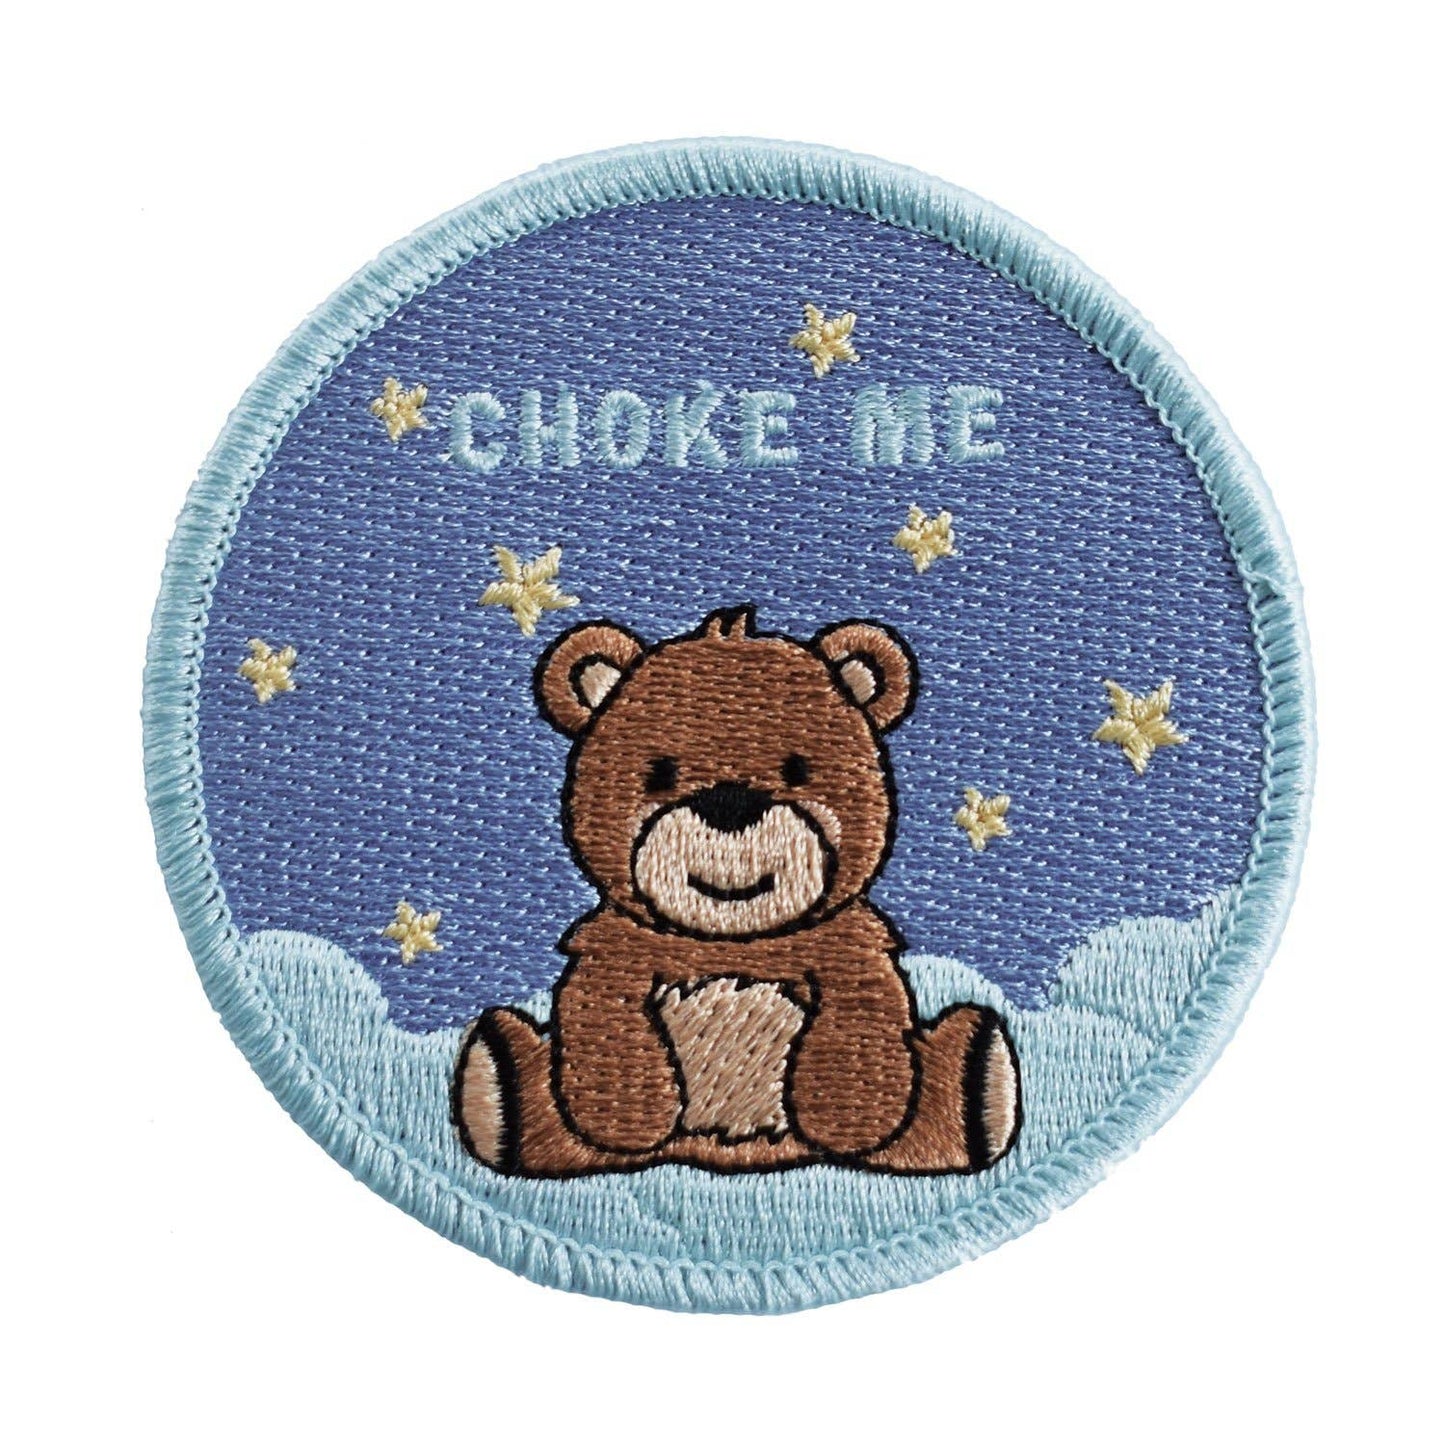 Choke Me Embroidered Patch